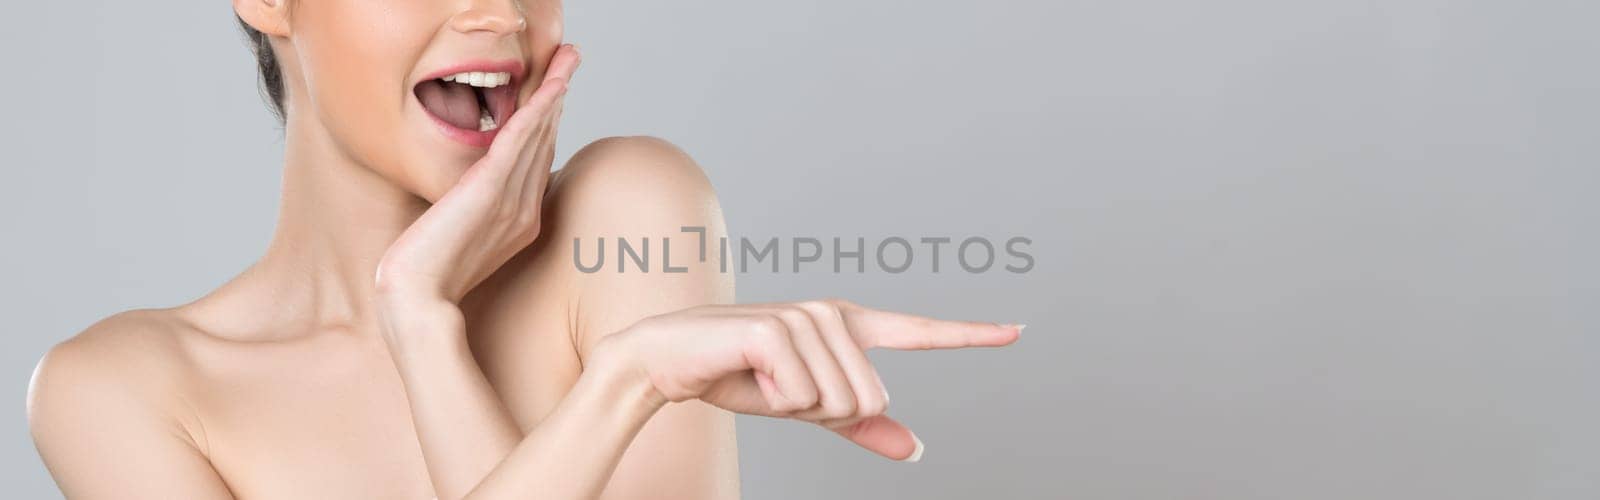 Closeup glamorous beautiful woman with perfect makeup clean skin pointing finger in copyspace isolated background. Promotion indicated by hand gesture concept for skincare product advertisement.